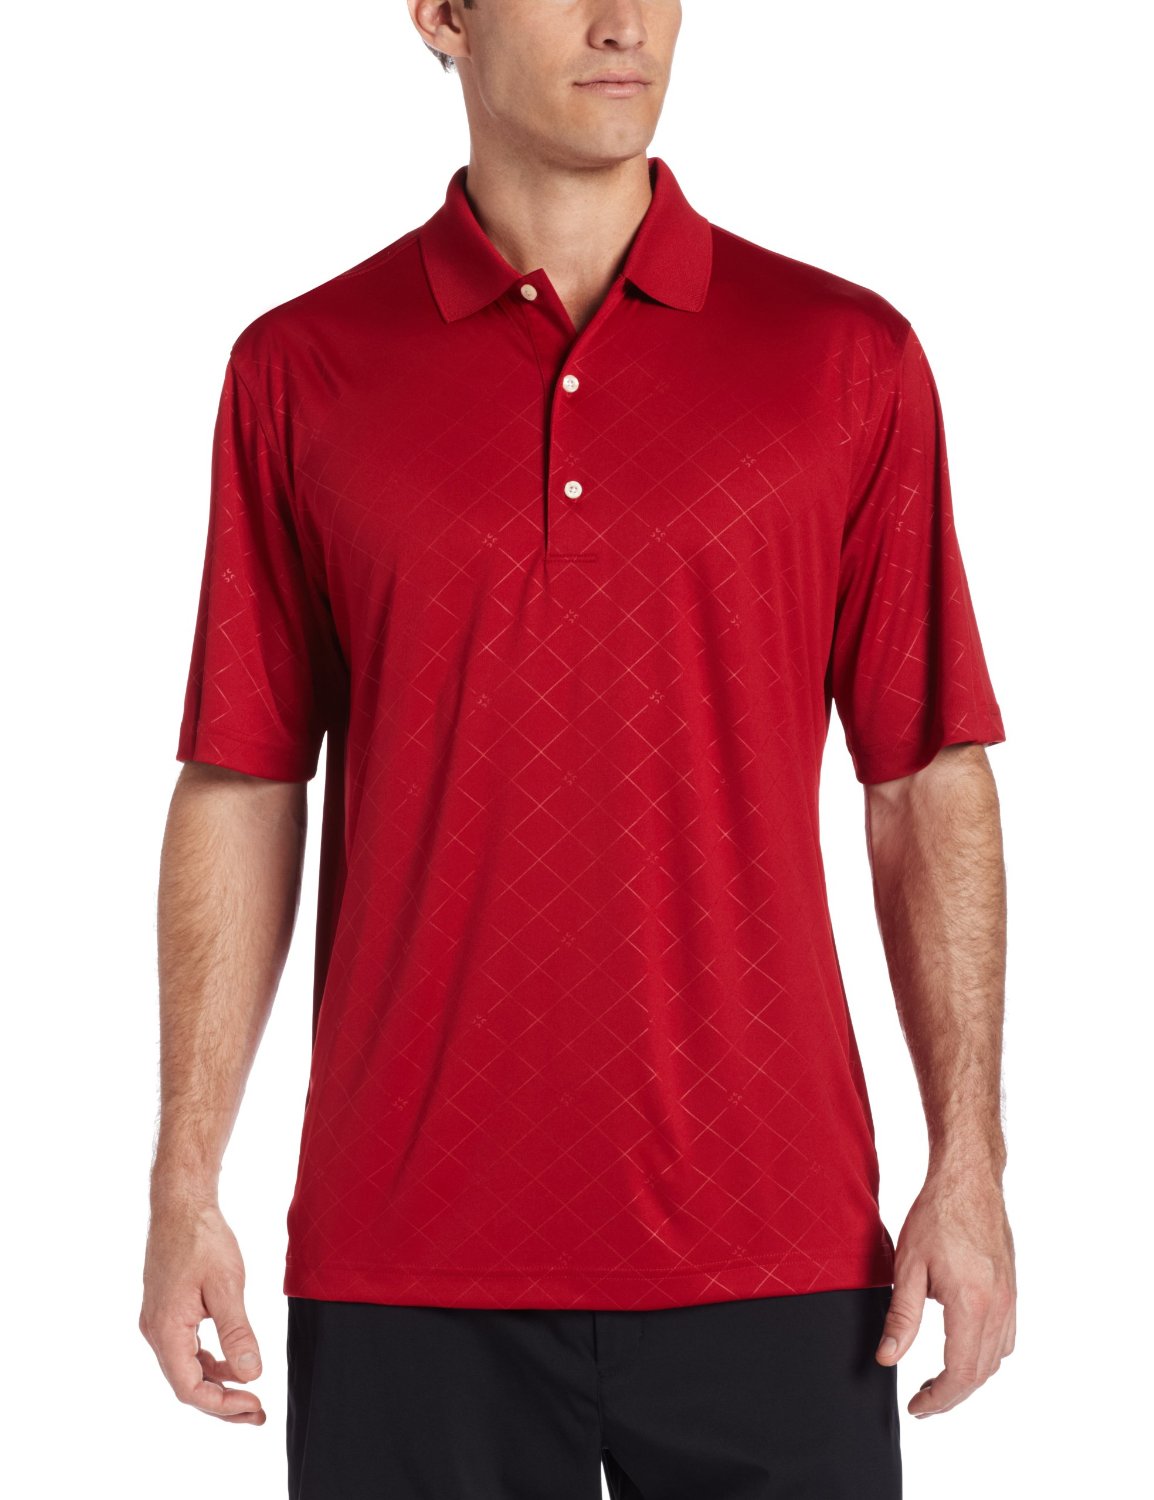 Greg Norman Mens Imperial Embossed Golf Shirts